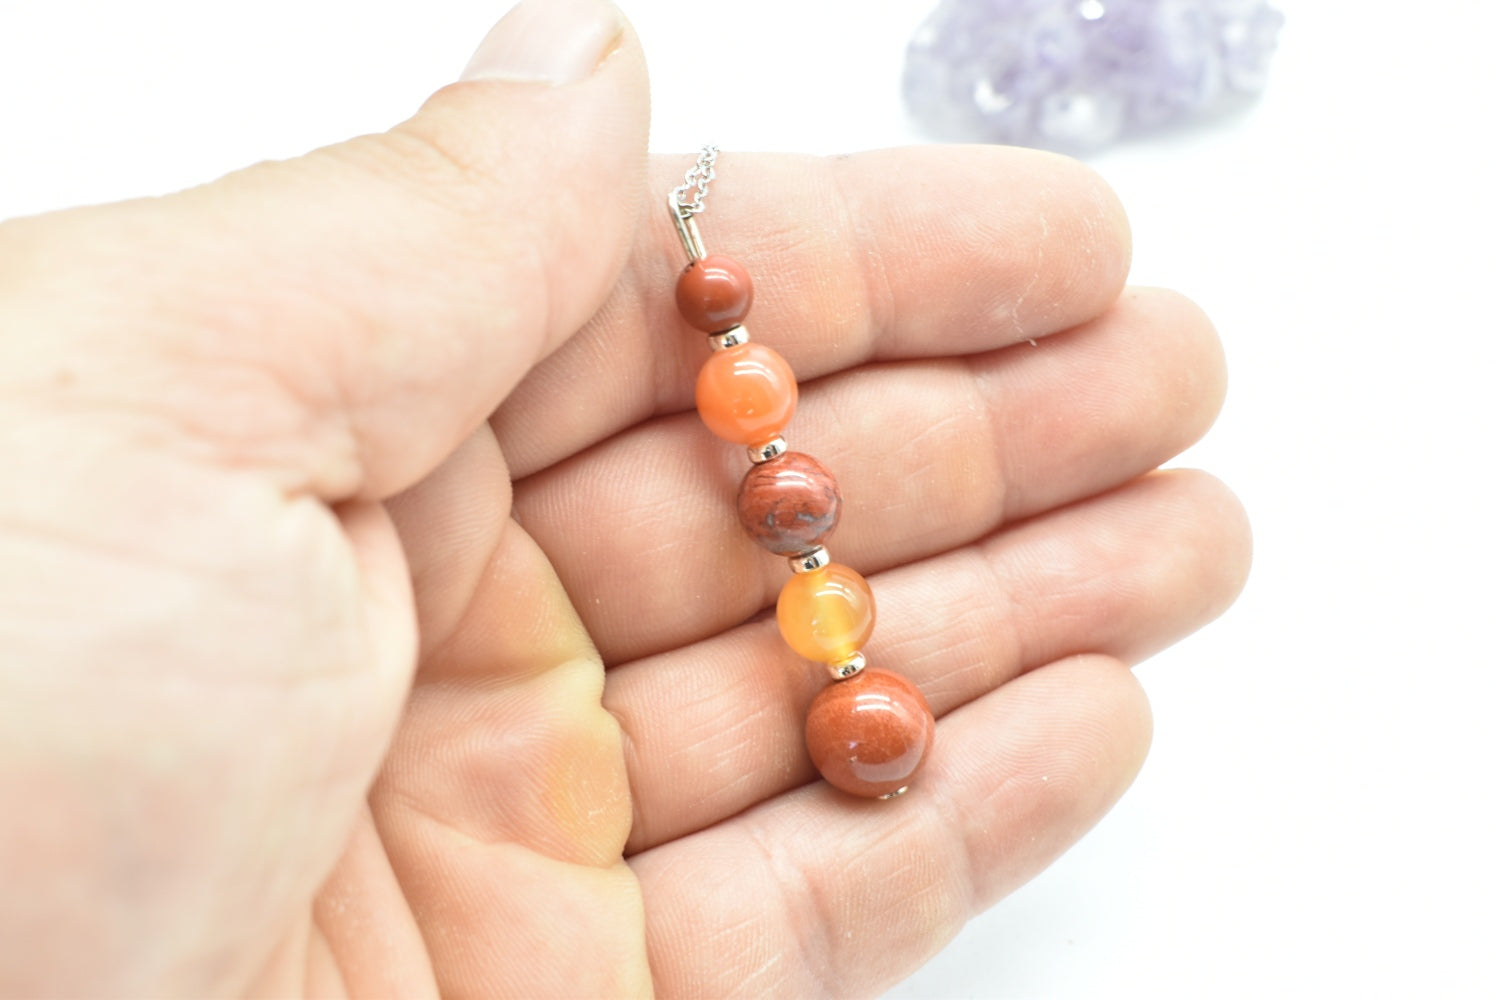 Red Jasper and Carnelian beads pendant with supports and necklace in 925 Silver